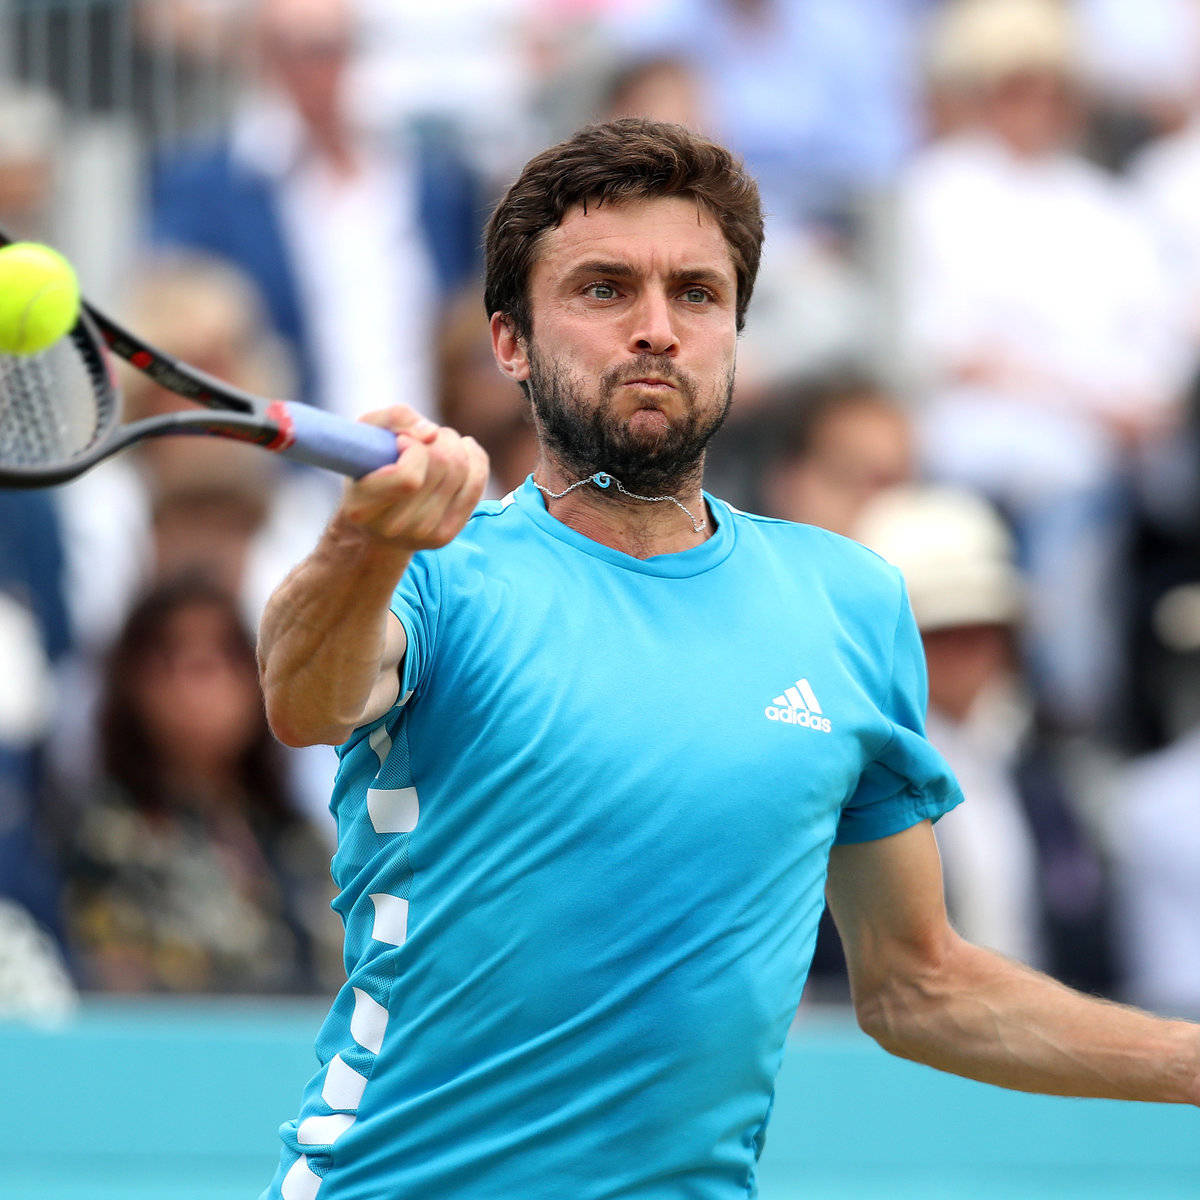 Gilles Simon in action during a professional tennis match. Wallpaper